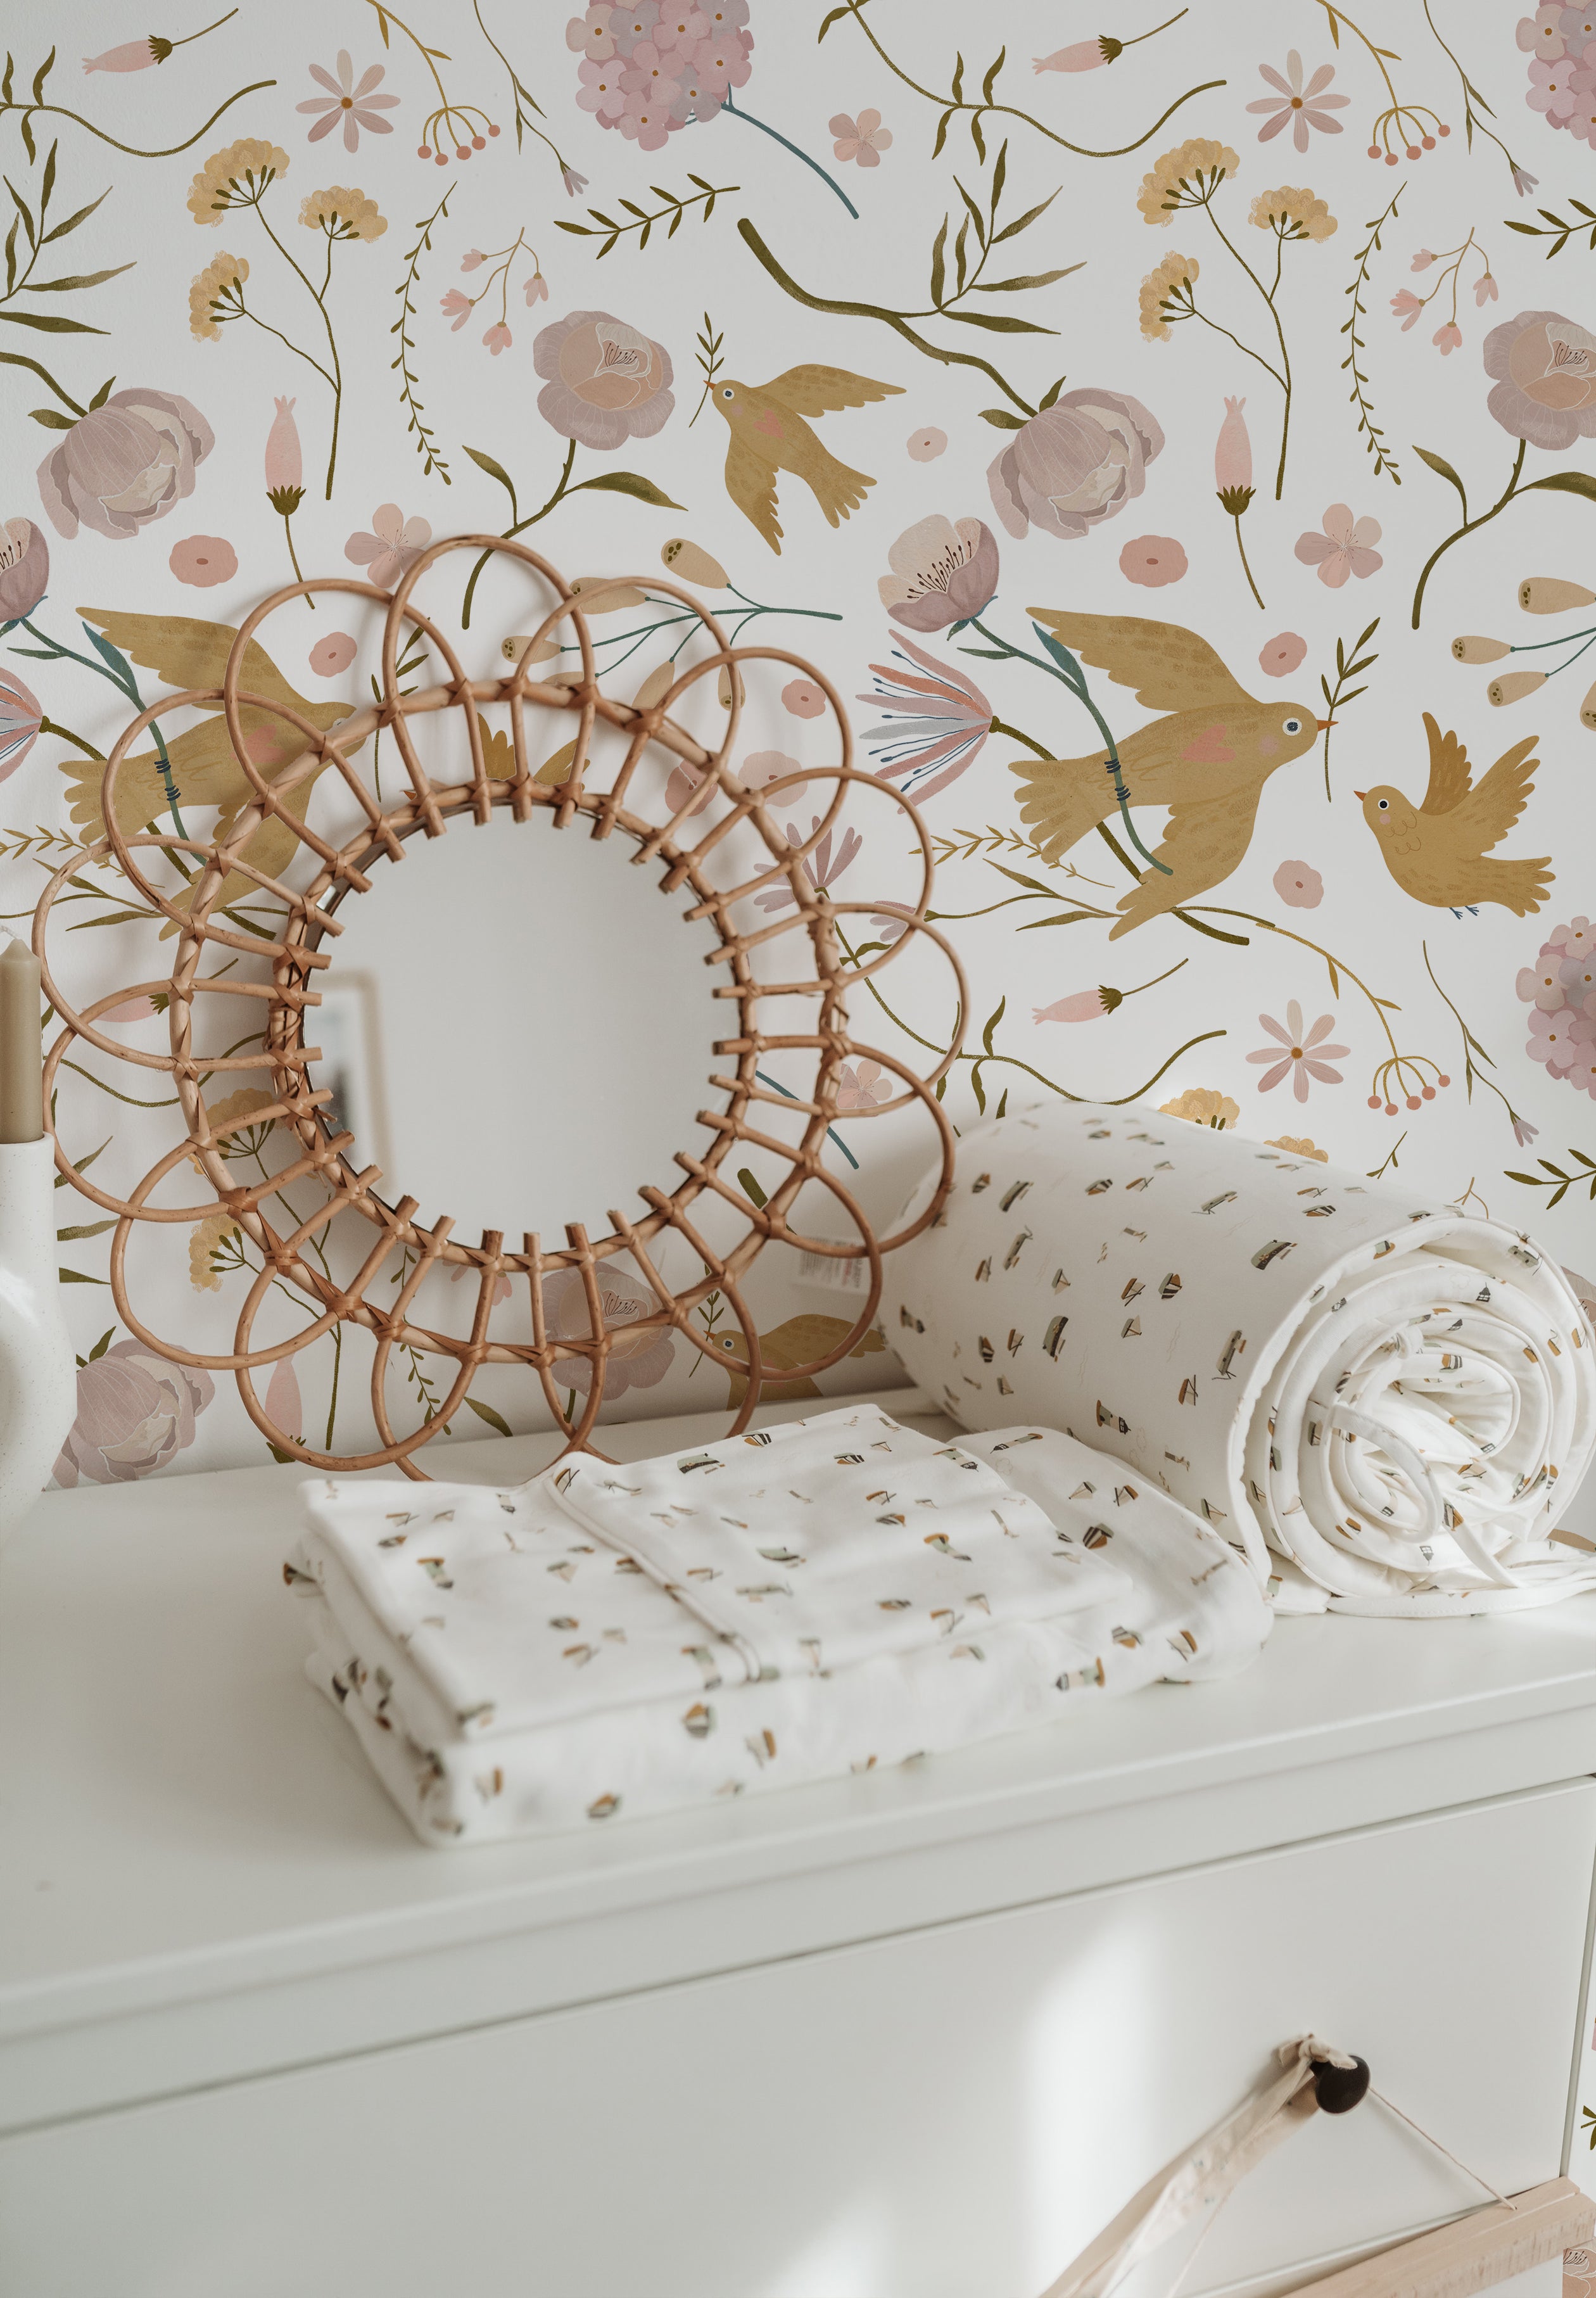 A decorative setting featuring the Pastel Garden Wallpaper, with a woven circular mirror and floral-printed textiles enhancing the wallpaper's intricate pattern of birds and blossoms.